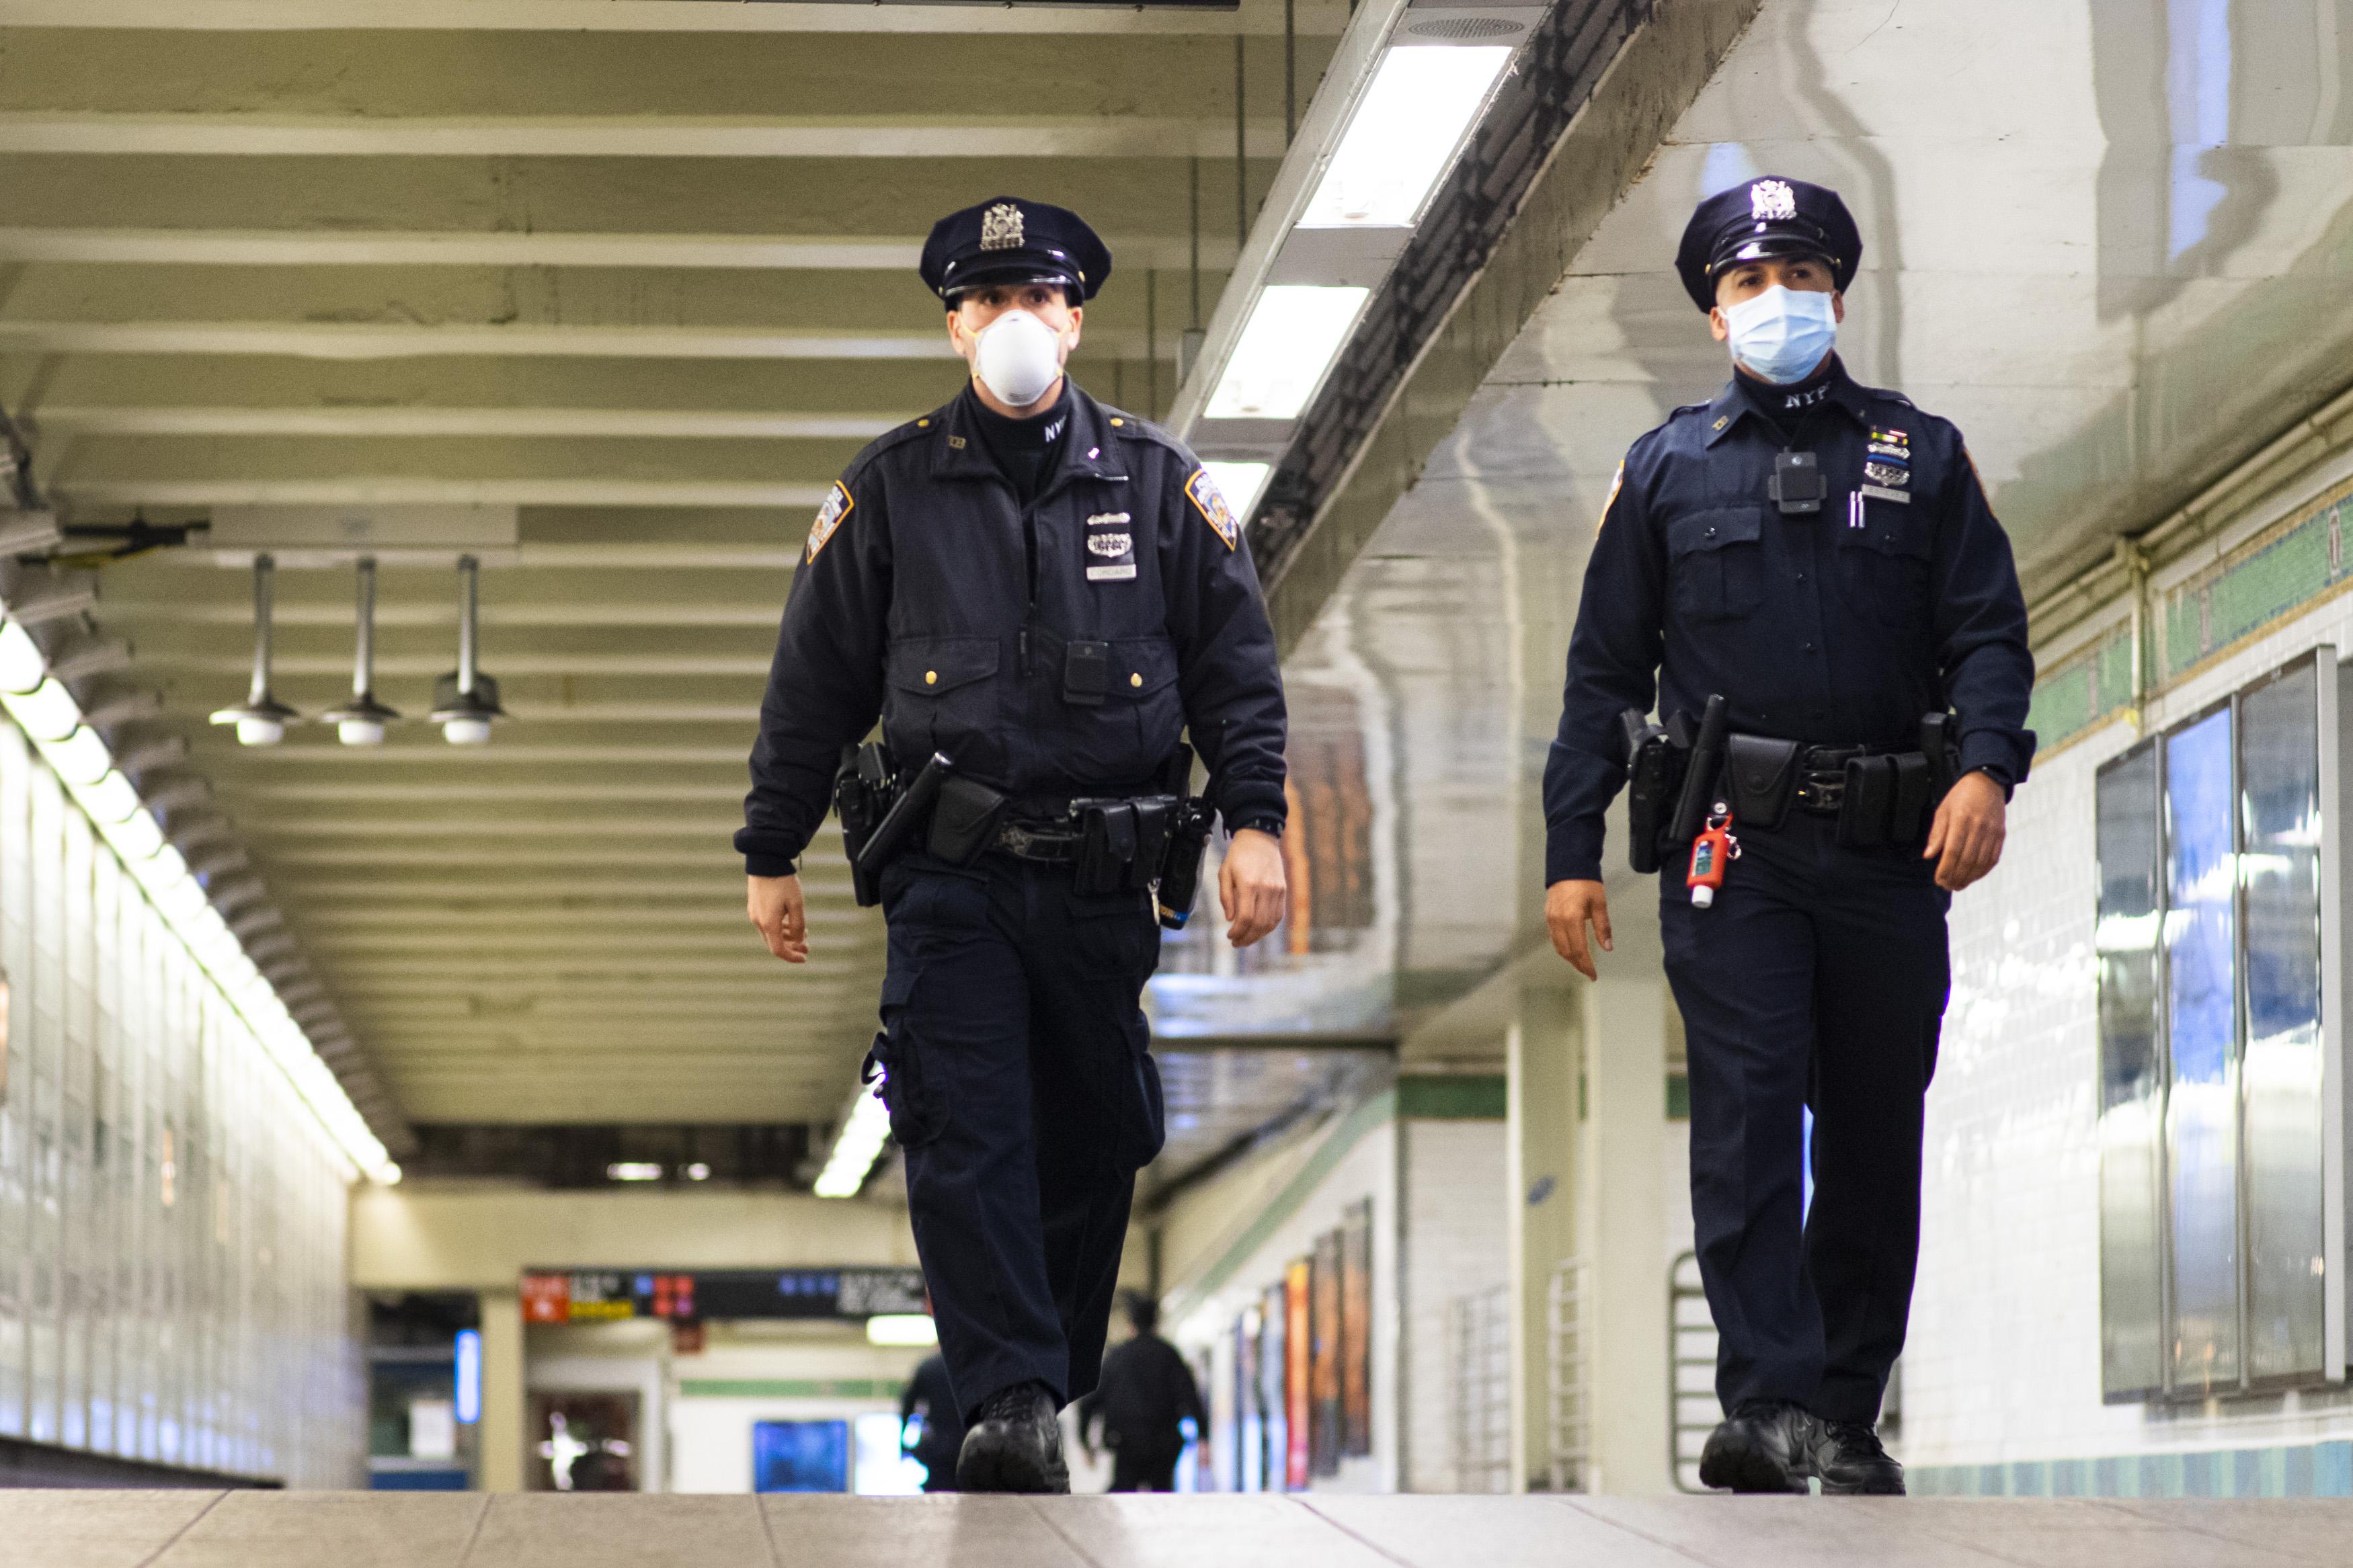 NYPD officers wearing face masks patrol inside a subway station.